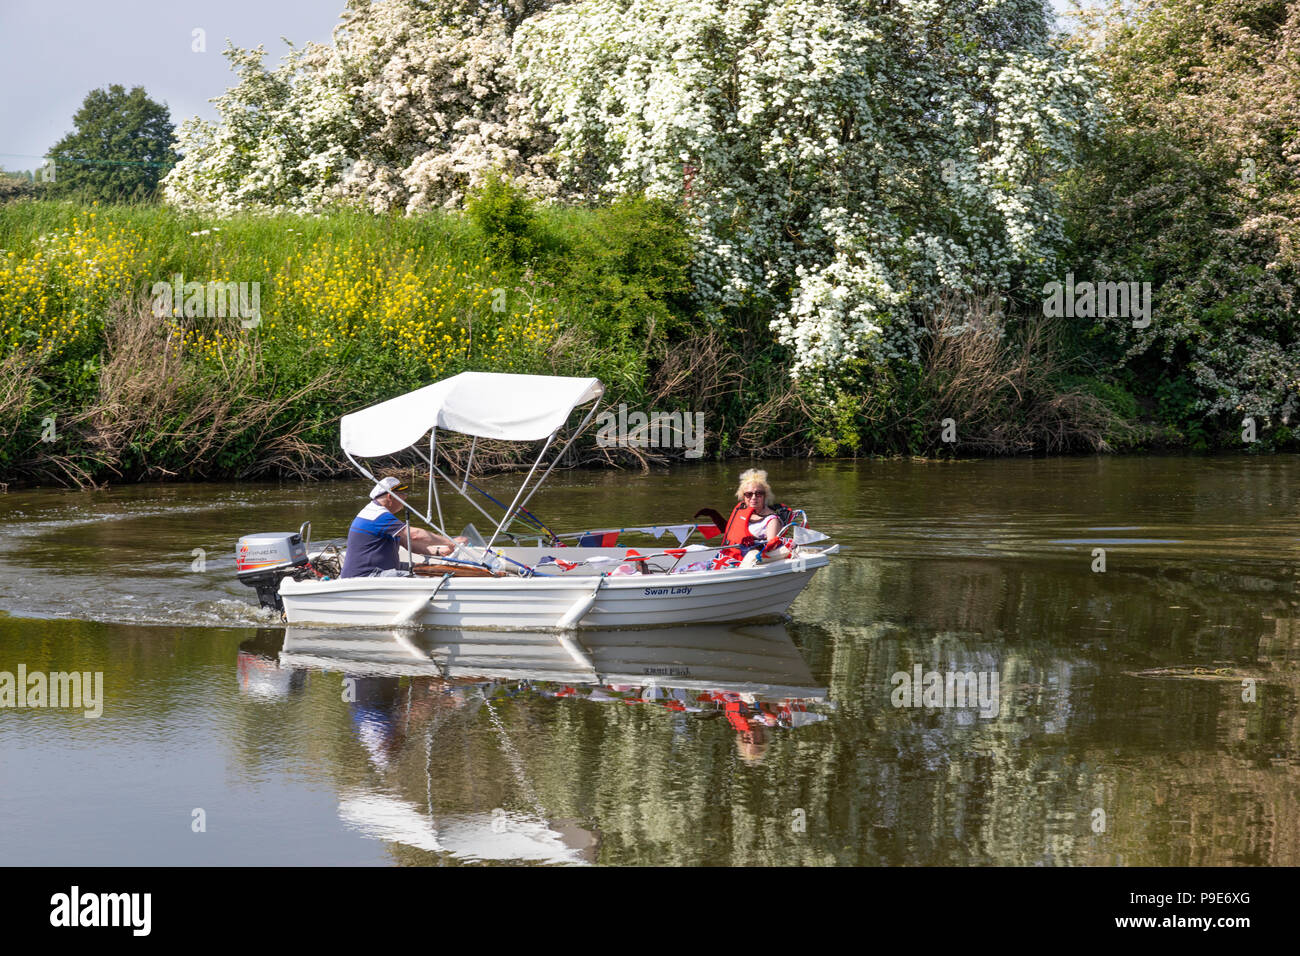 Sunday afternoon pleasure boating on the River Avon at Tewkesbury, Gloucestershire UK Stock Photo